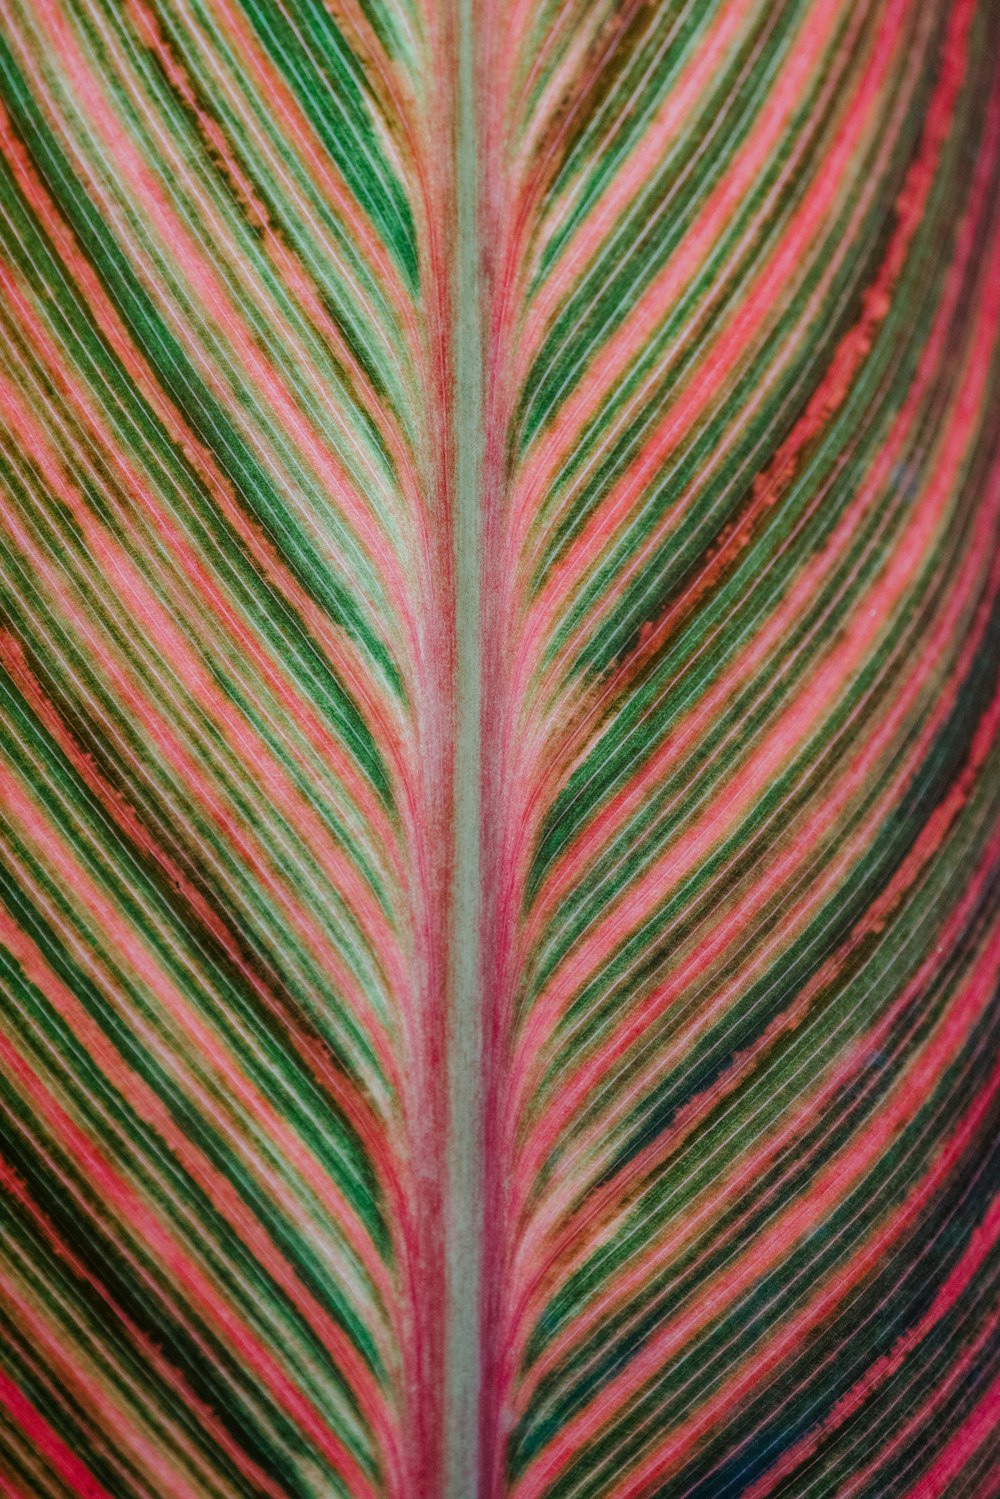 a close up view of a colorful leaf